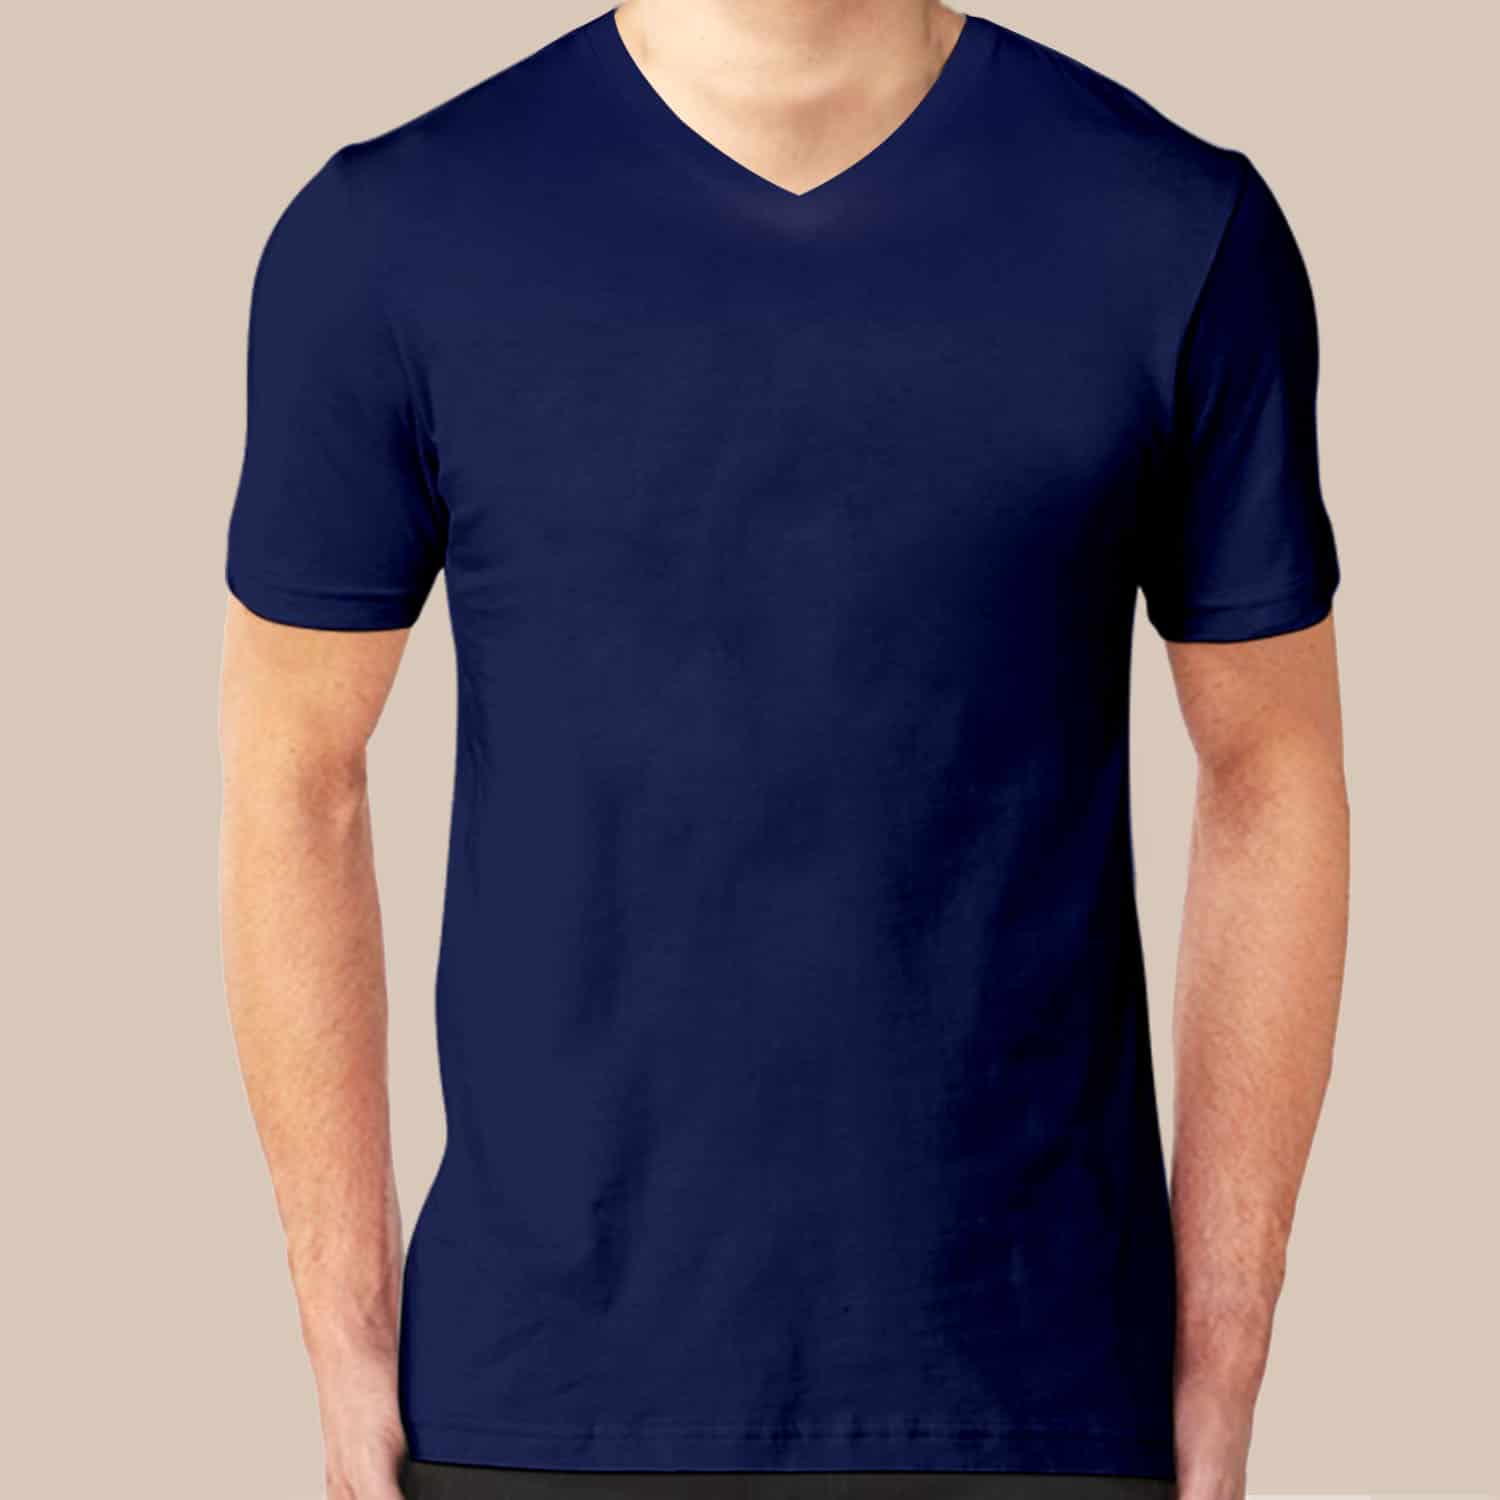 Download Free T Shirt Mockups To Give Your Sales A Boost Rachel Rofe